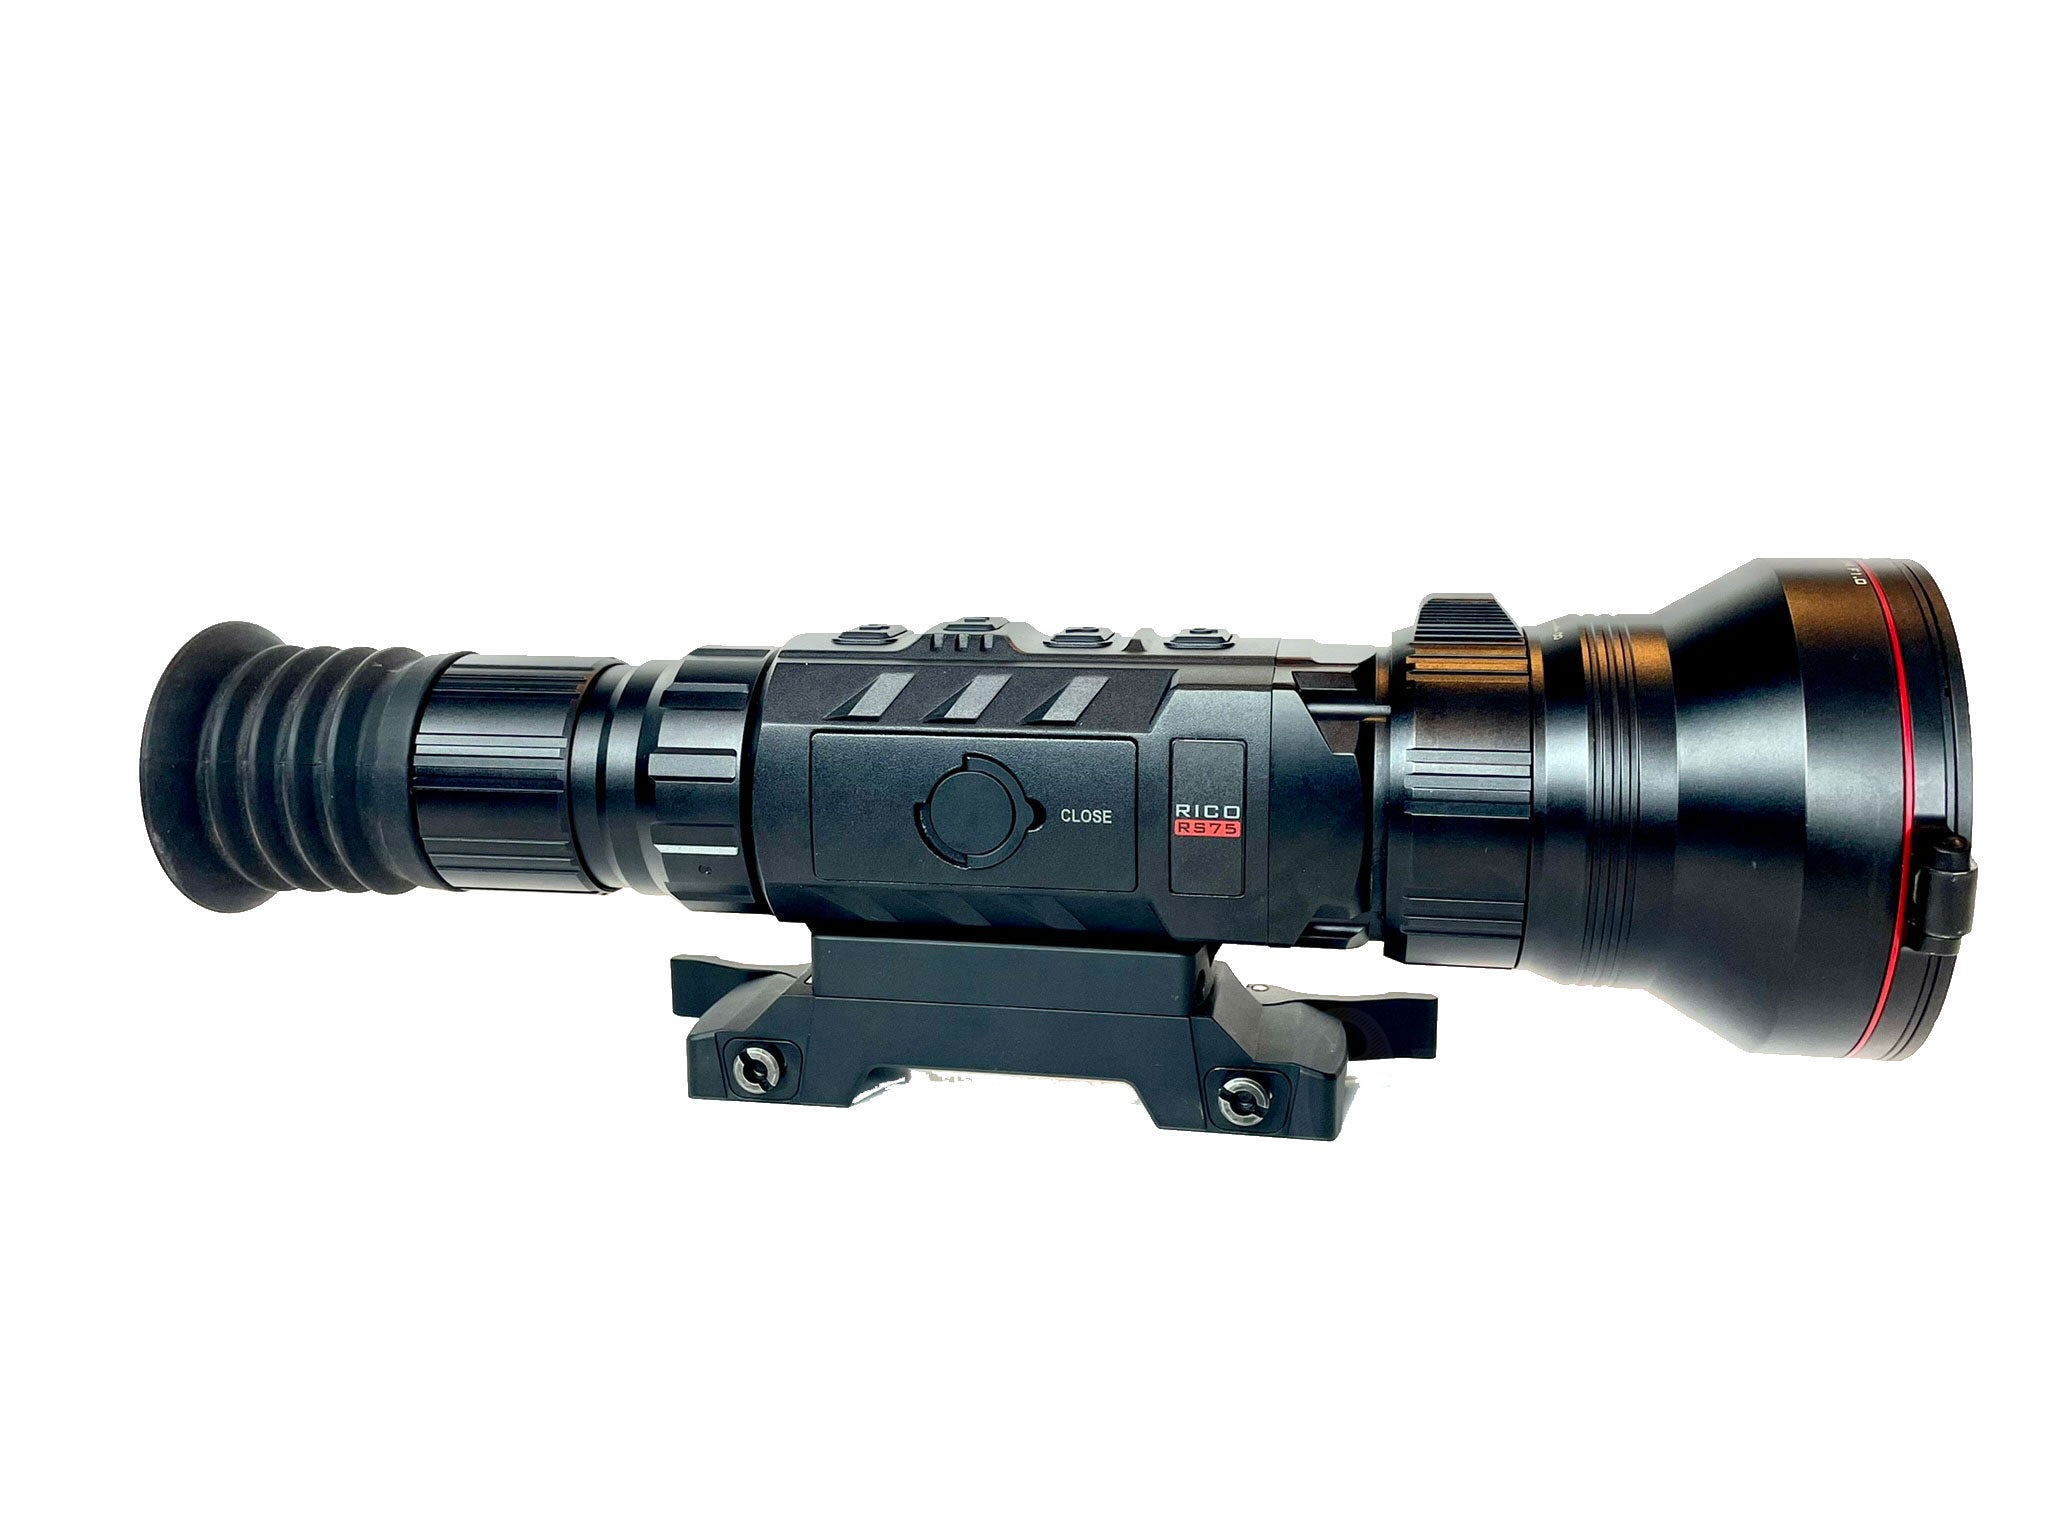 InfiRay Outdoor RICO RS75 1280 2-16x Thermal Rifle Scope